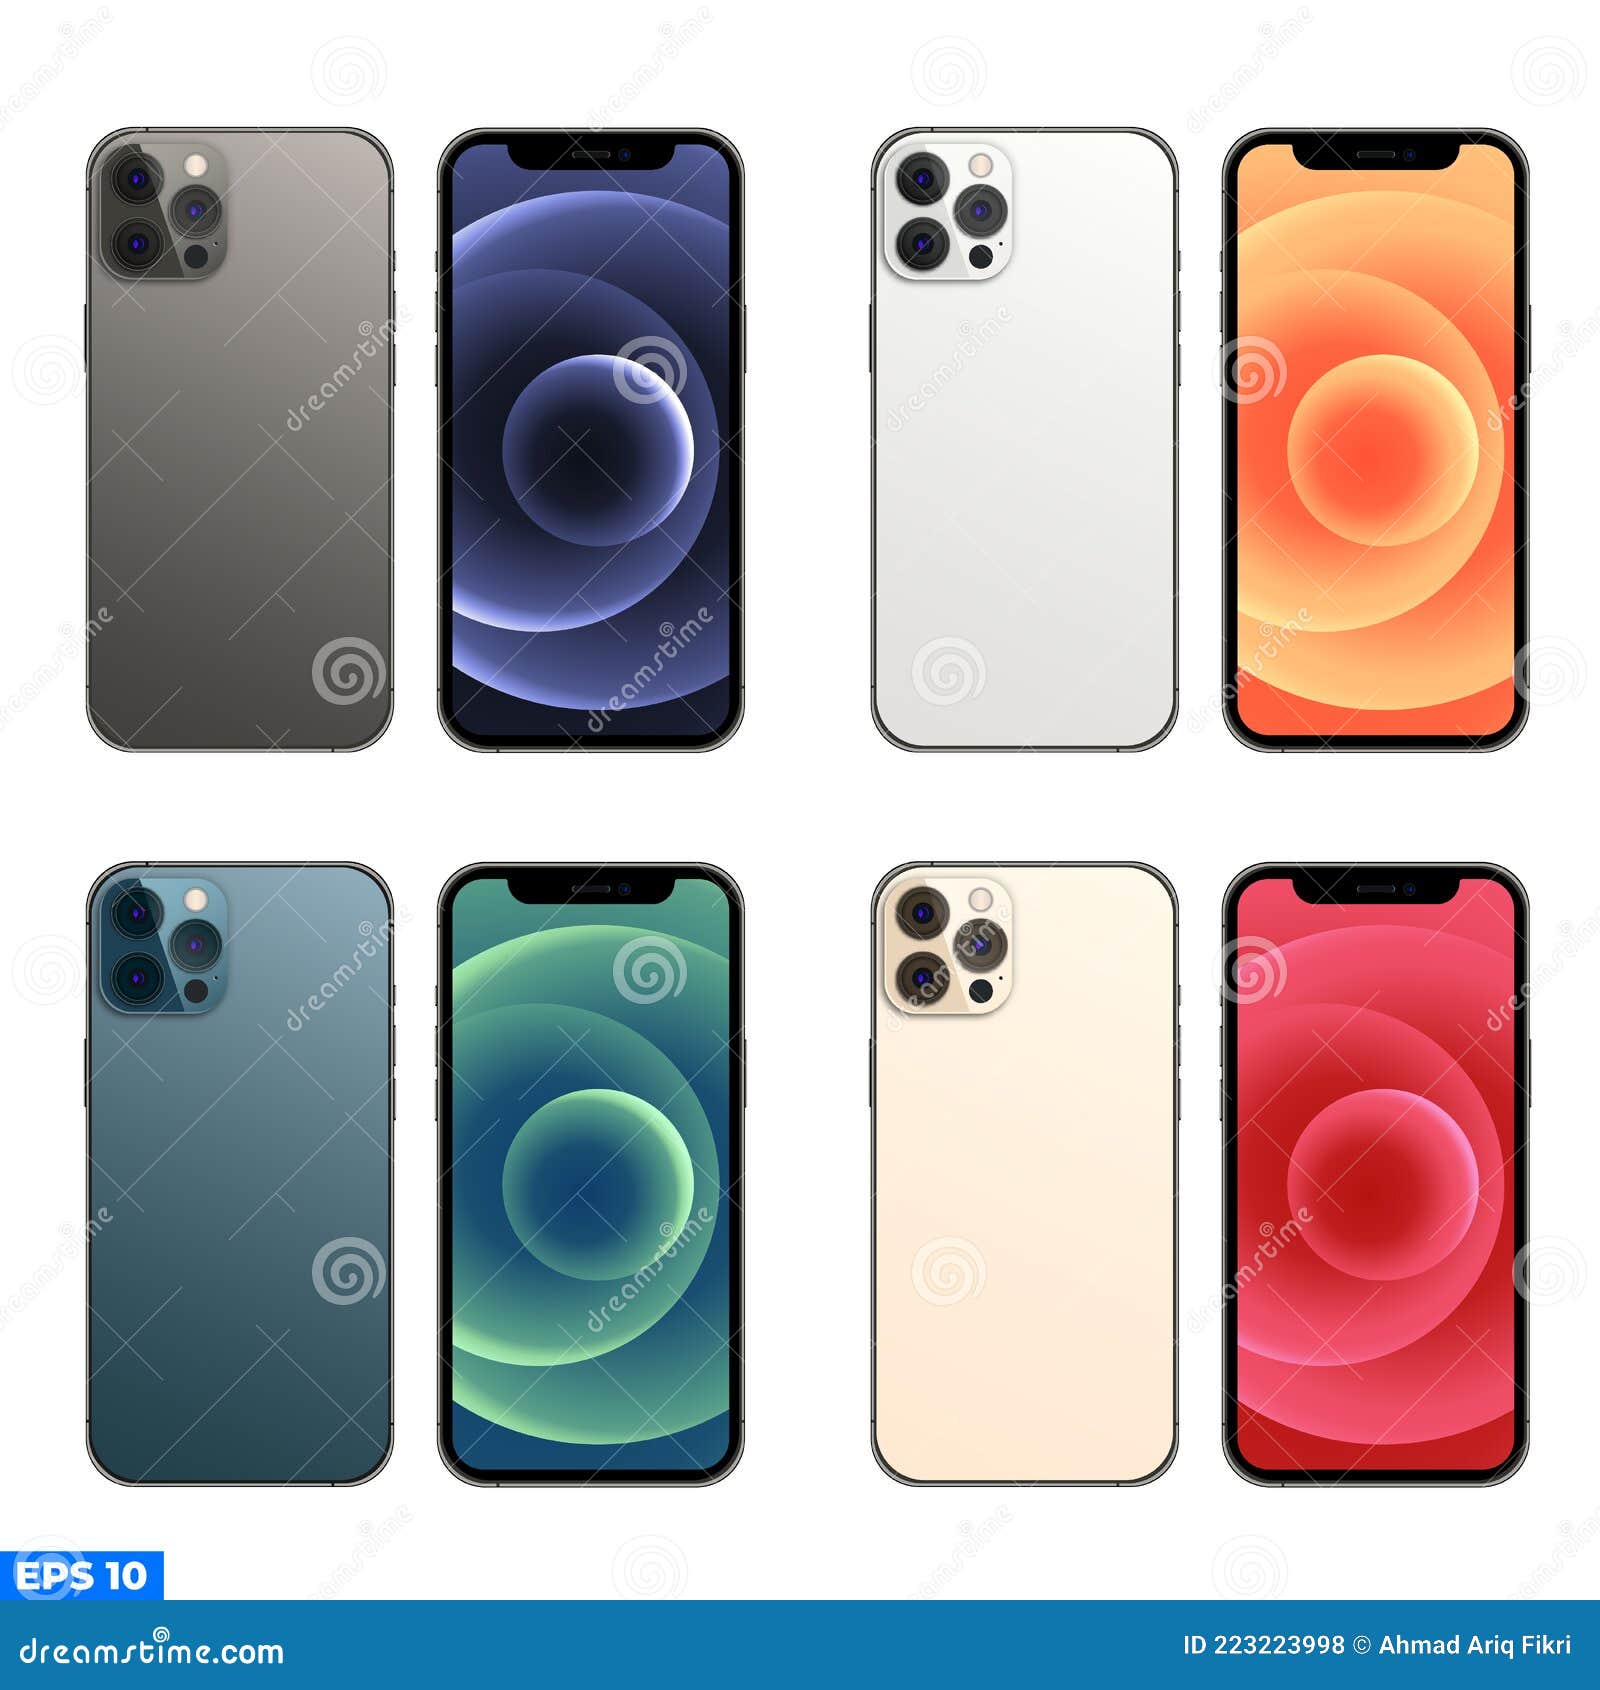 Magelang Indonesia July 03 21 New Iphone 12 Pro Or Pro Max In Four Colors Graphite Pacific Blue Silver Gold By Apple Editorial Stock Photo Illustration Of Portable Background